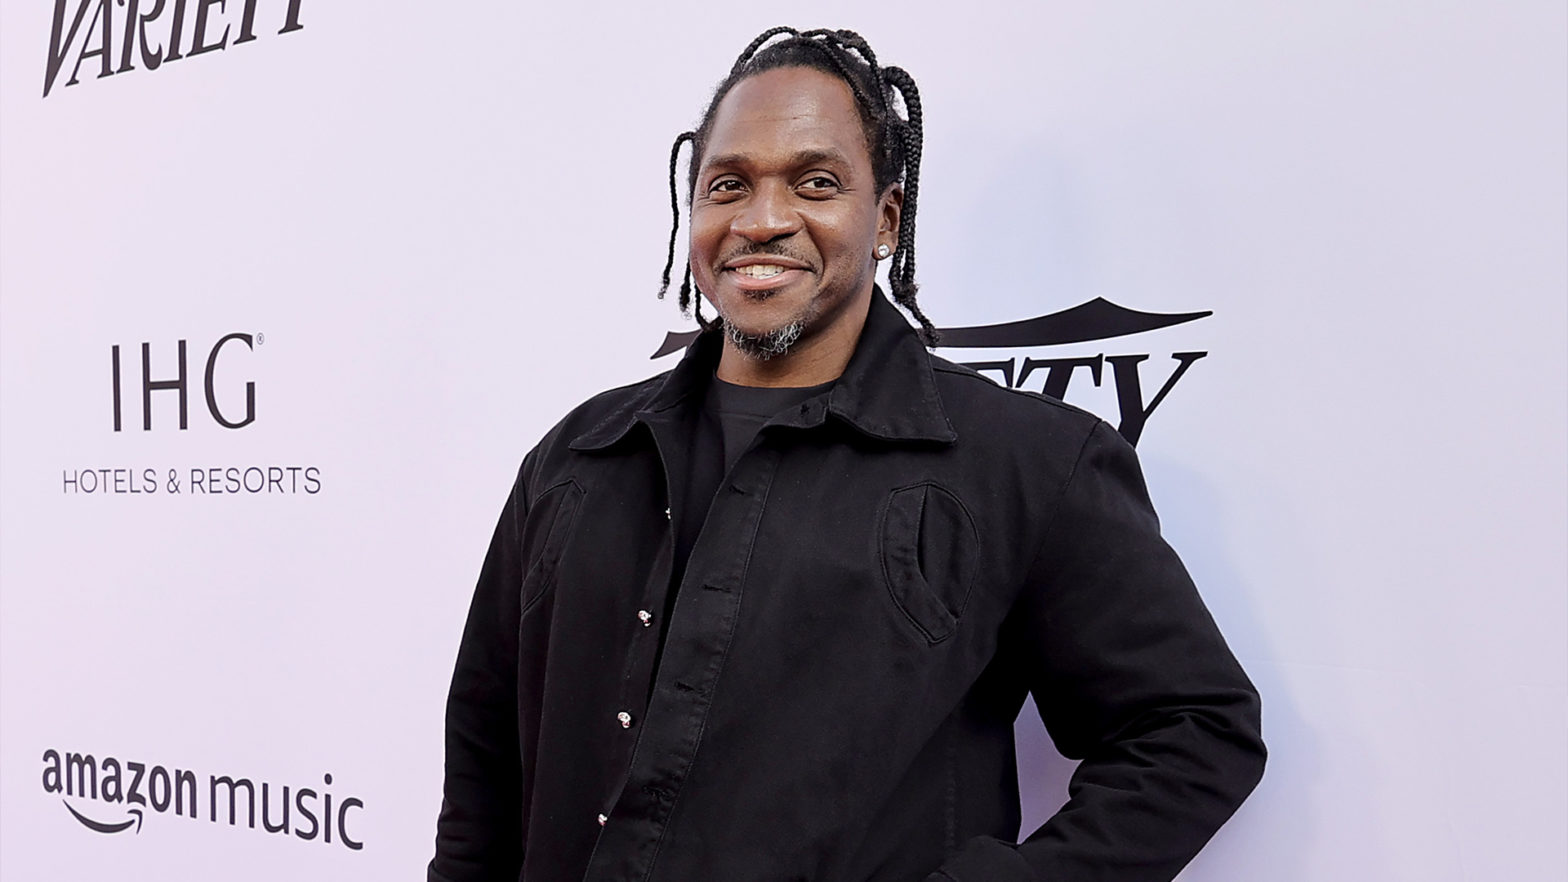 Pusha T Reponds To Claim Estimating His Diss Track Gave Arby's $8.2M In Advertising Exposure Via Twitter